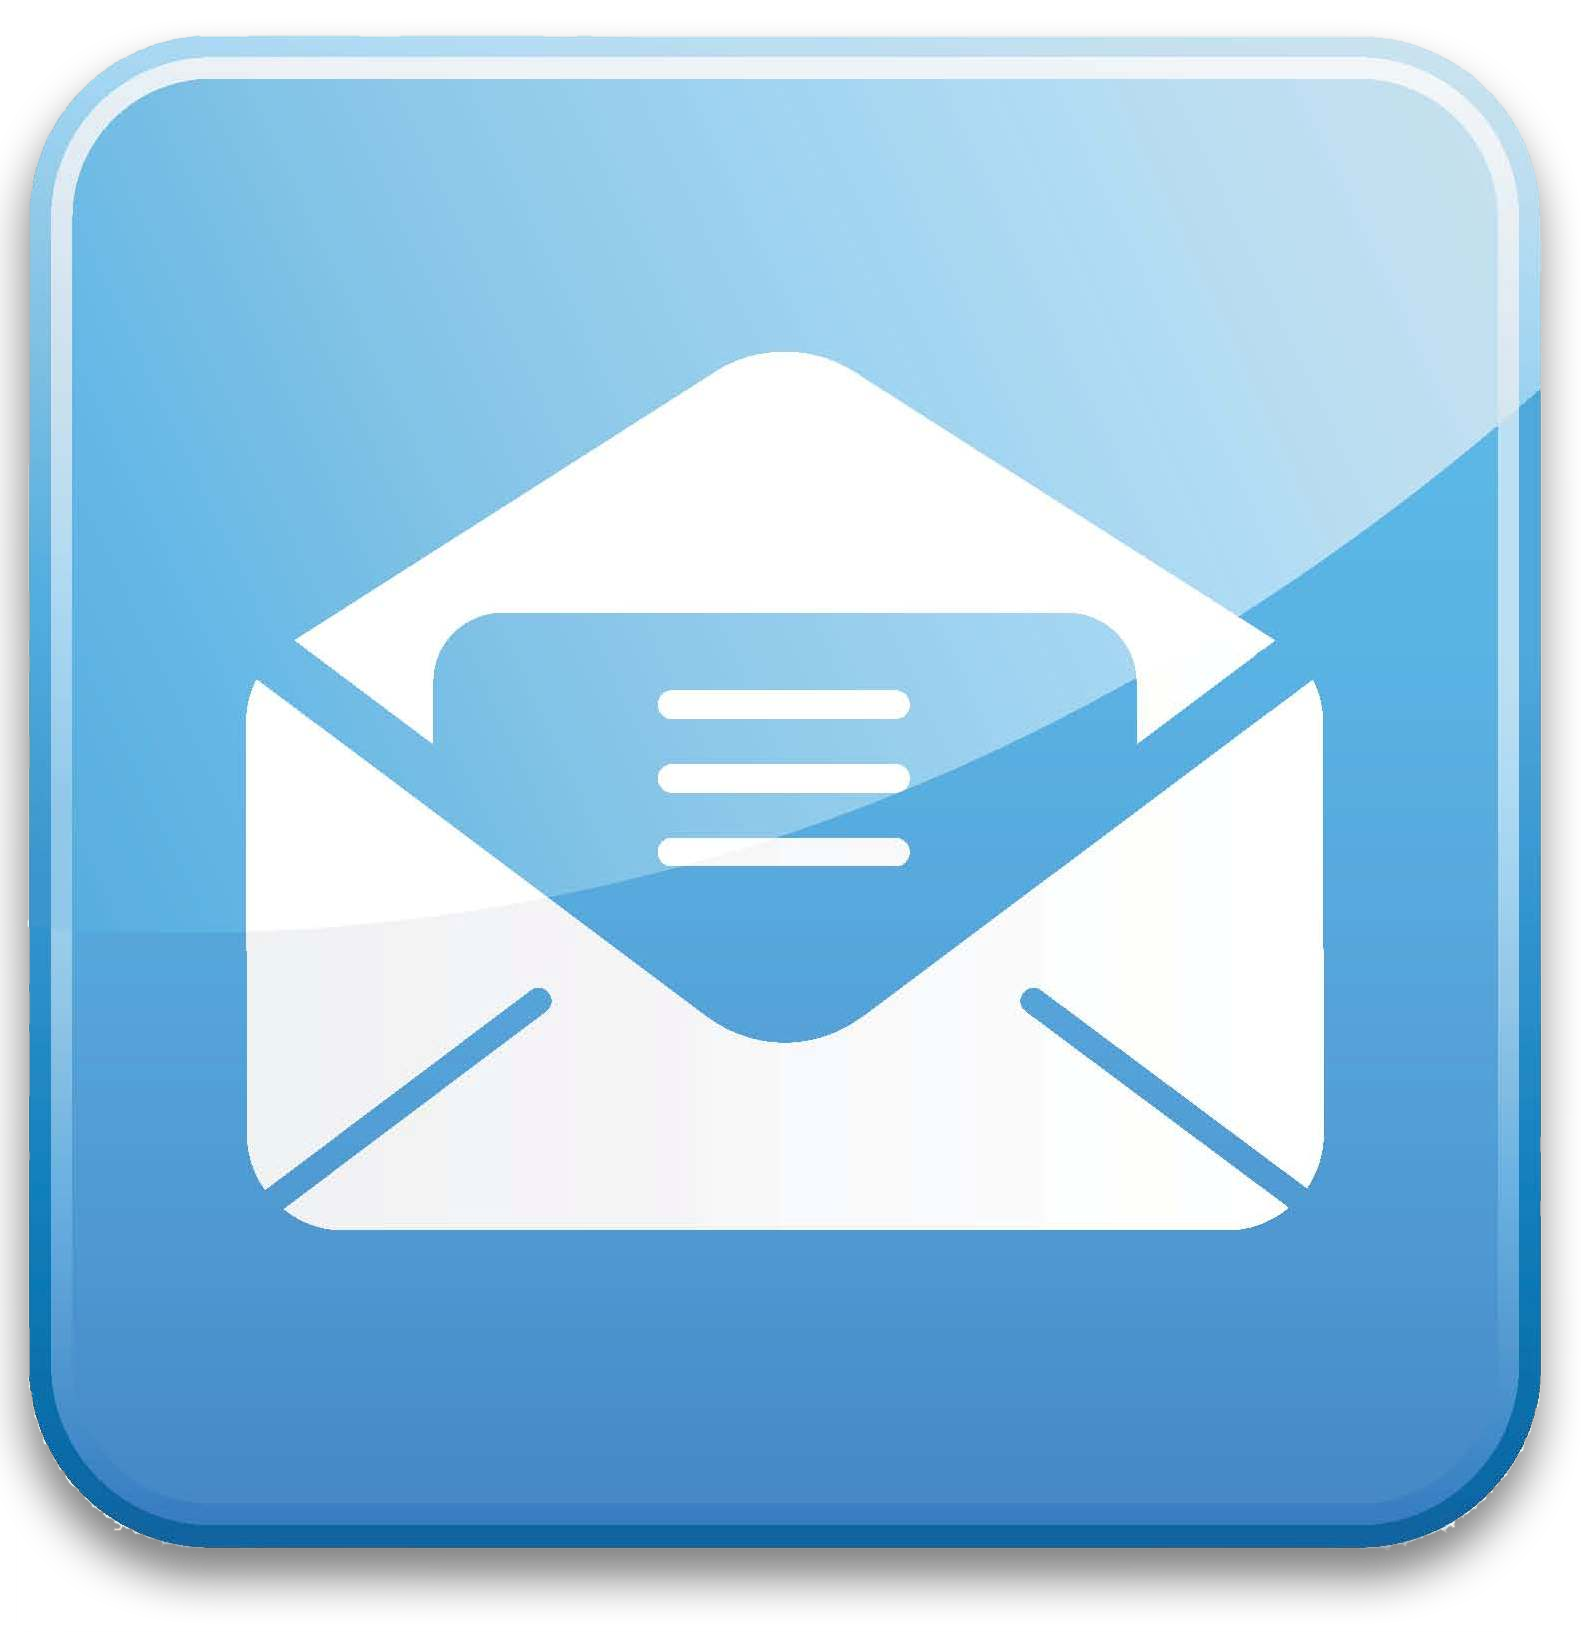 E-mail Notification Based On Saved Search Criteria - E Mail Icon Gif (1581x1632)